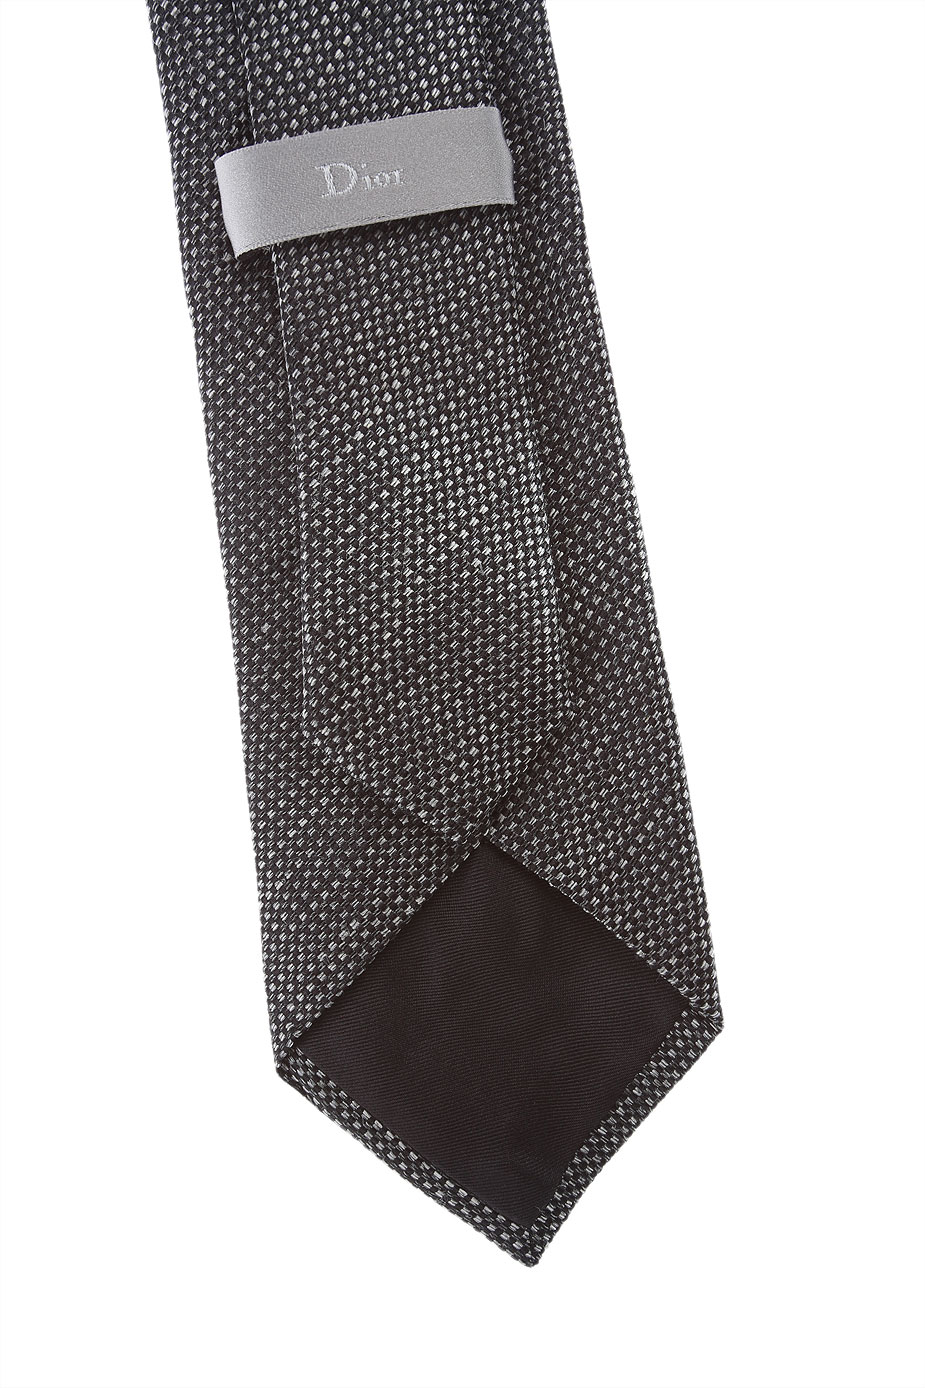 Ties Christian Dior, Style code: r220011--